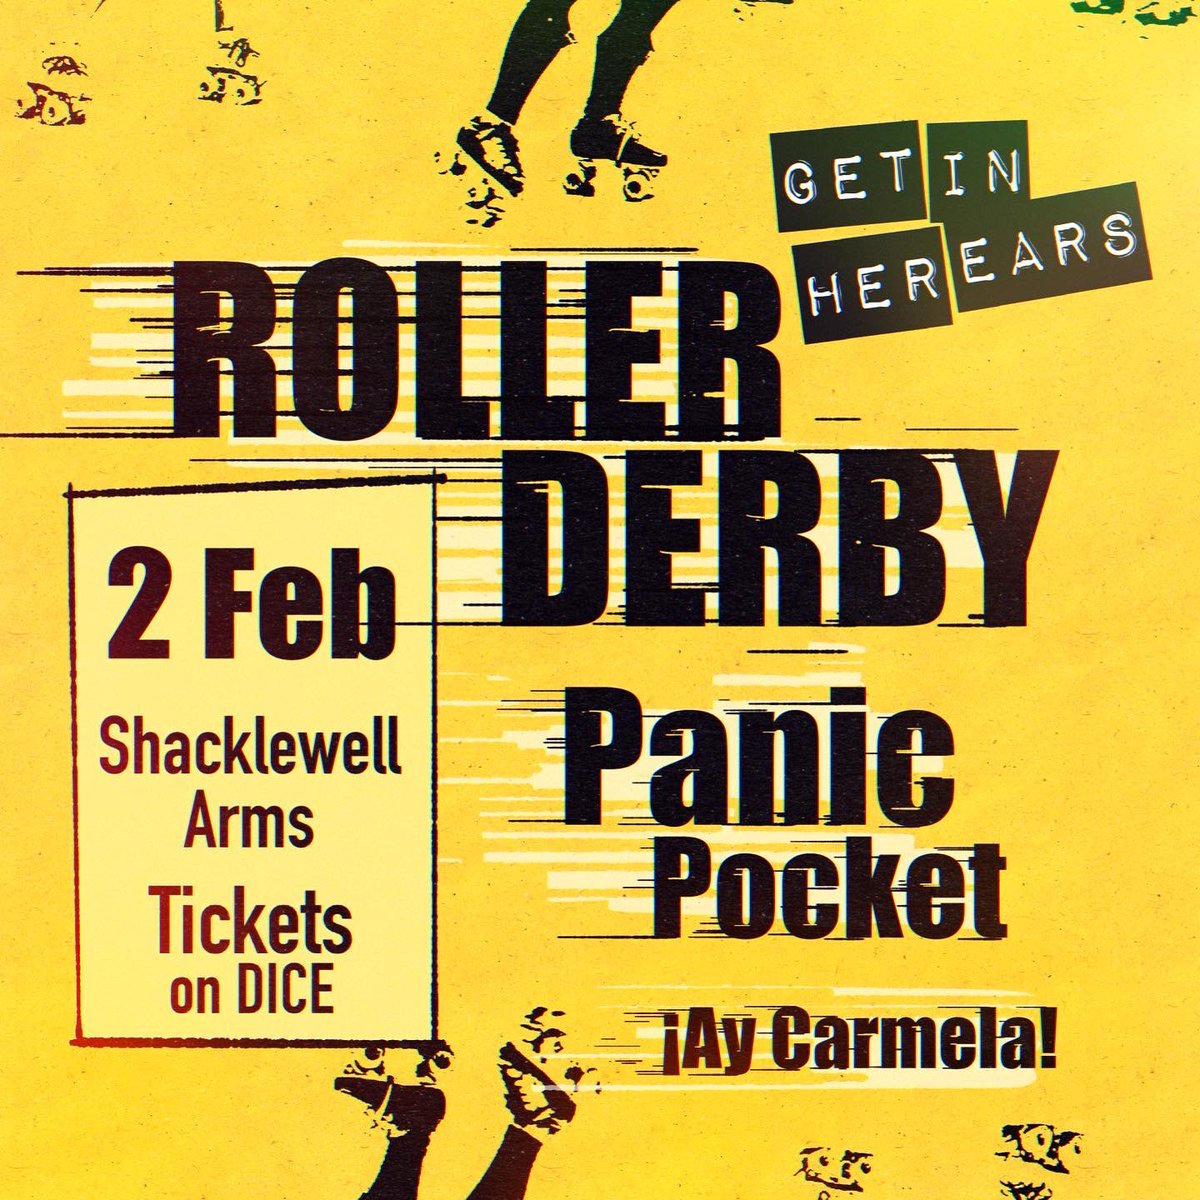 💛 THIS FRIDAY! Our first gig of the year at @ShacklewellArms ! 💛 German dream-pop from Roller Derby, plus support from @panic_pocket & @aycarmelaband 🛼 Last few tickets here 🎟link.dice.fm/3GXZRNpLKGb Collecting donations for vital organisations @think2speak & @UNRWA 🏳️‍⚧️🏳️‍🌈🇵🇸